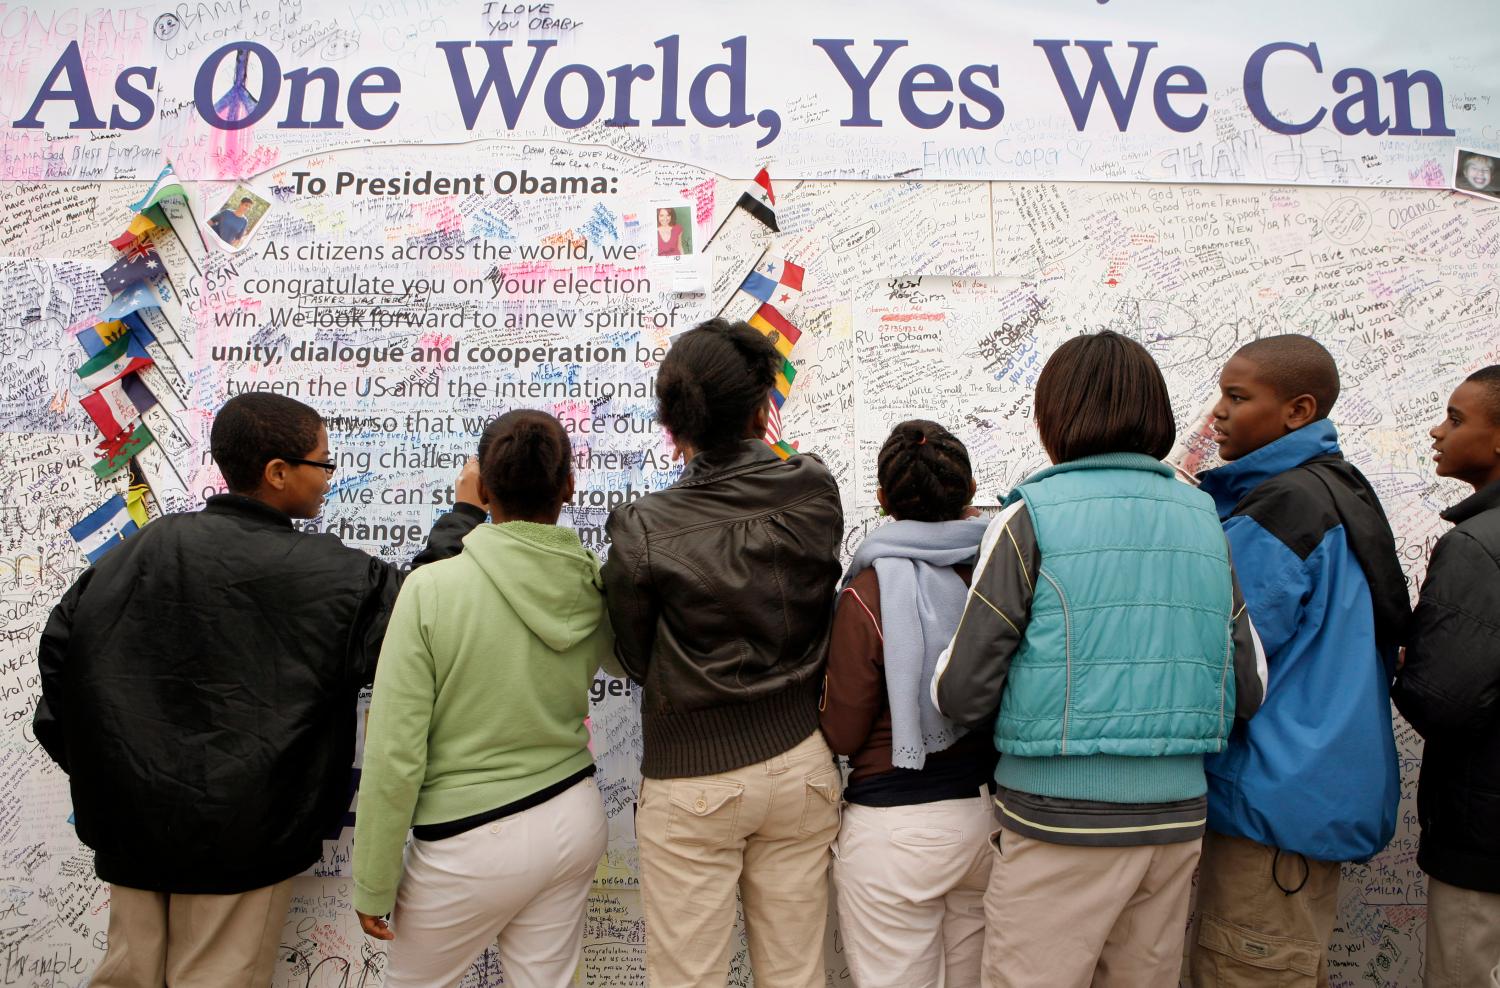 Students sign a message board dedicated to Barack Obama in Washington, D.C.